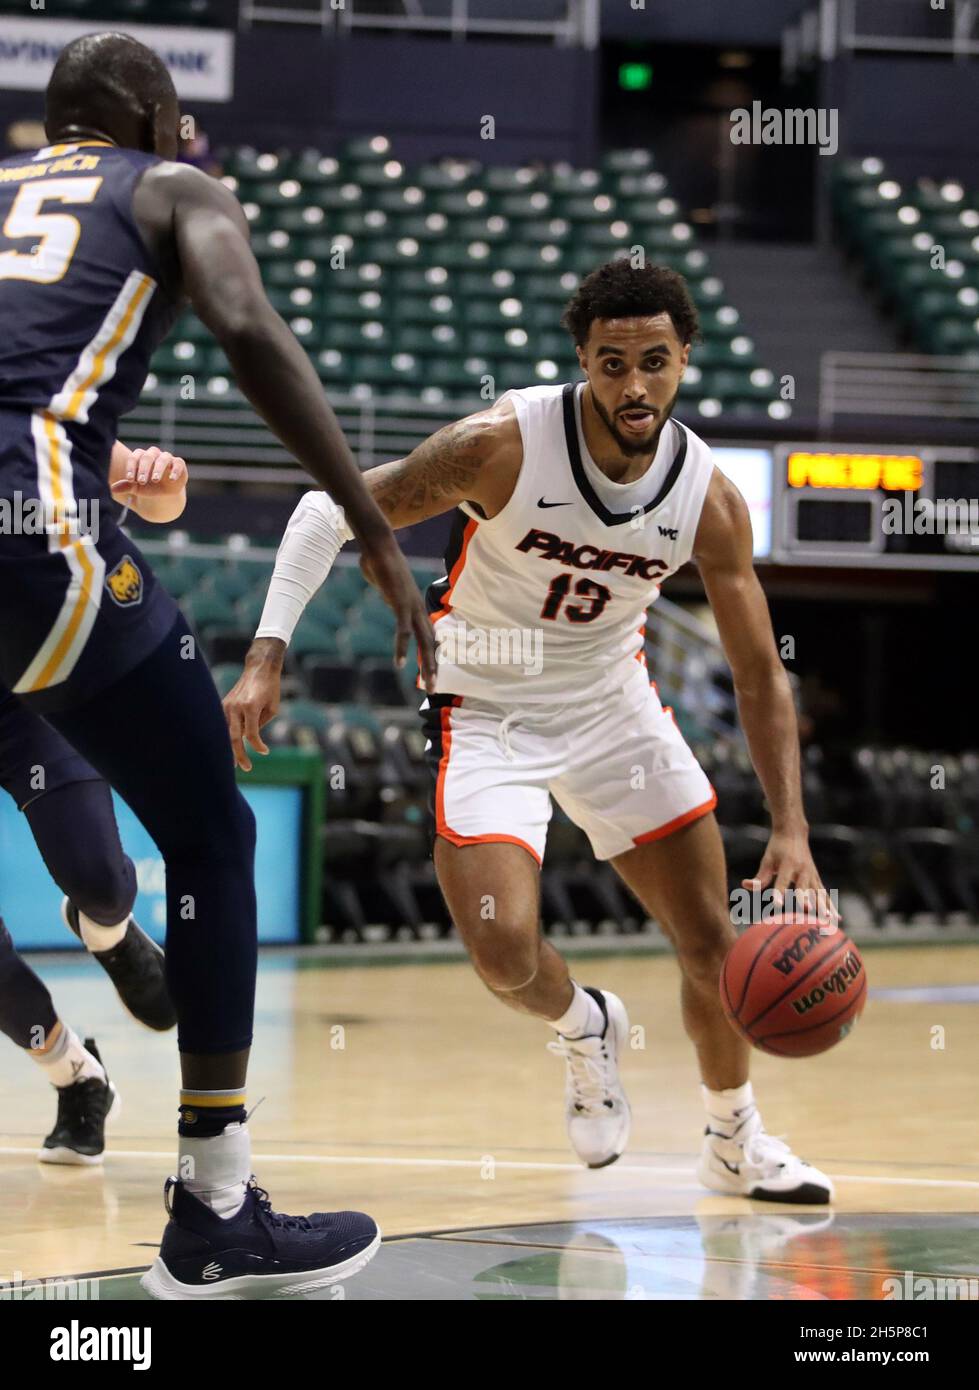 November 10, 2021 - Pacific Tigers forward Jeremiah Bailey #13 drives the lane in a game between the Pacific Tigers and the Northern Colorado Bears during the Rainbow Classic at the SimpliFi Arena at the Stan Sheriff Center in Honolulu, HI - Michael Sullivan/CSM Stock Photo